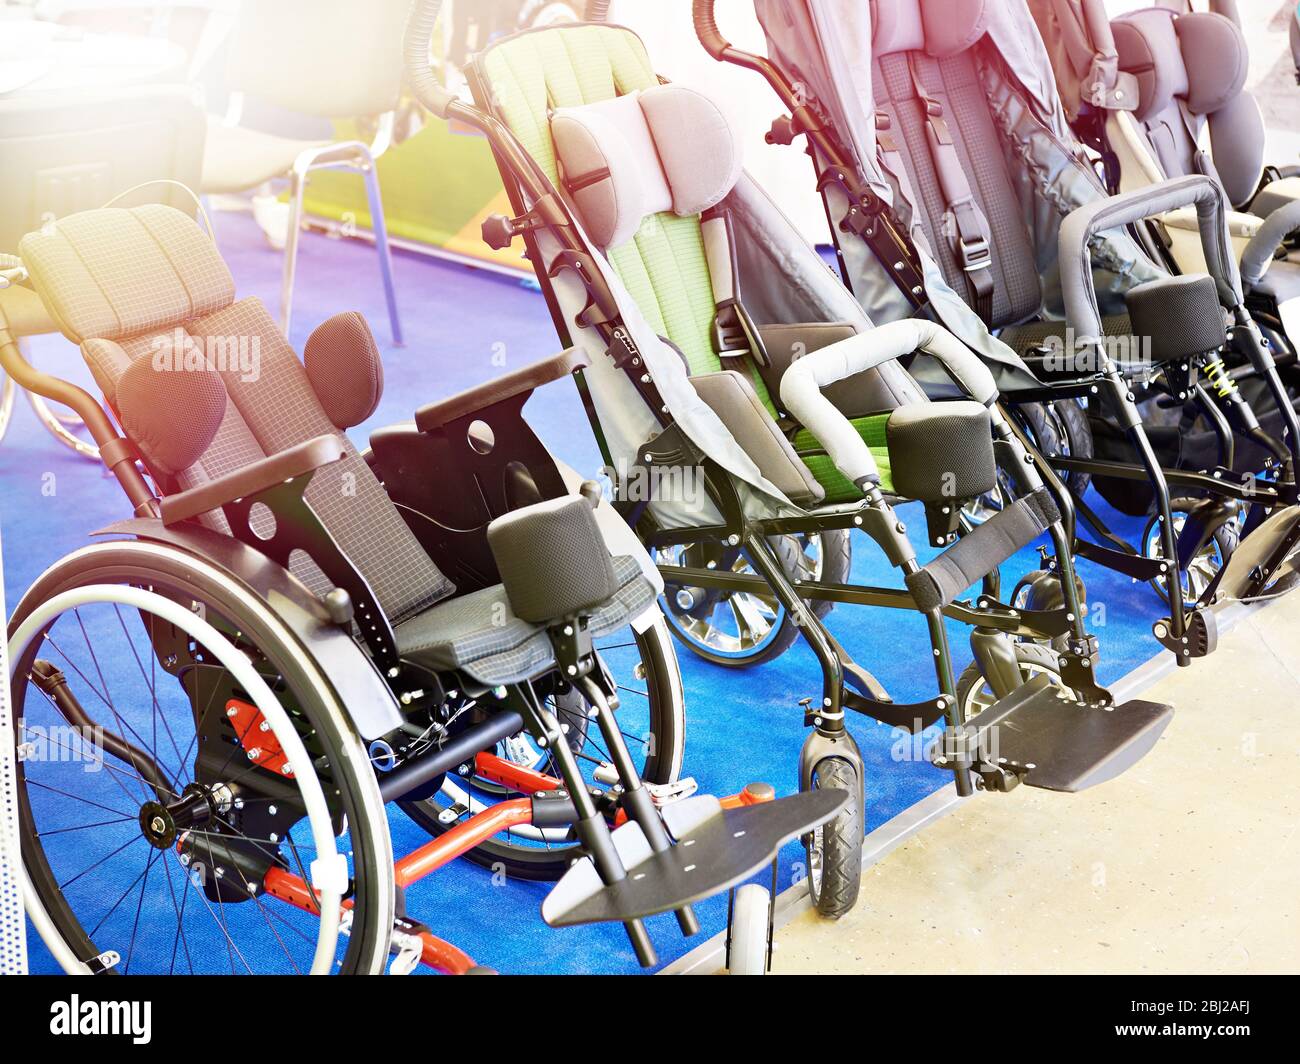 in store wheelchairs